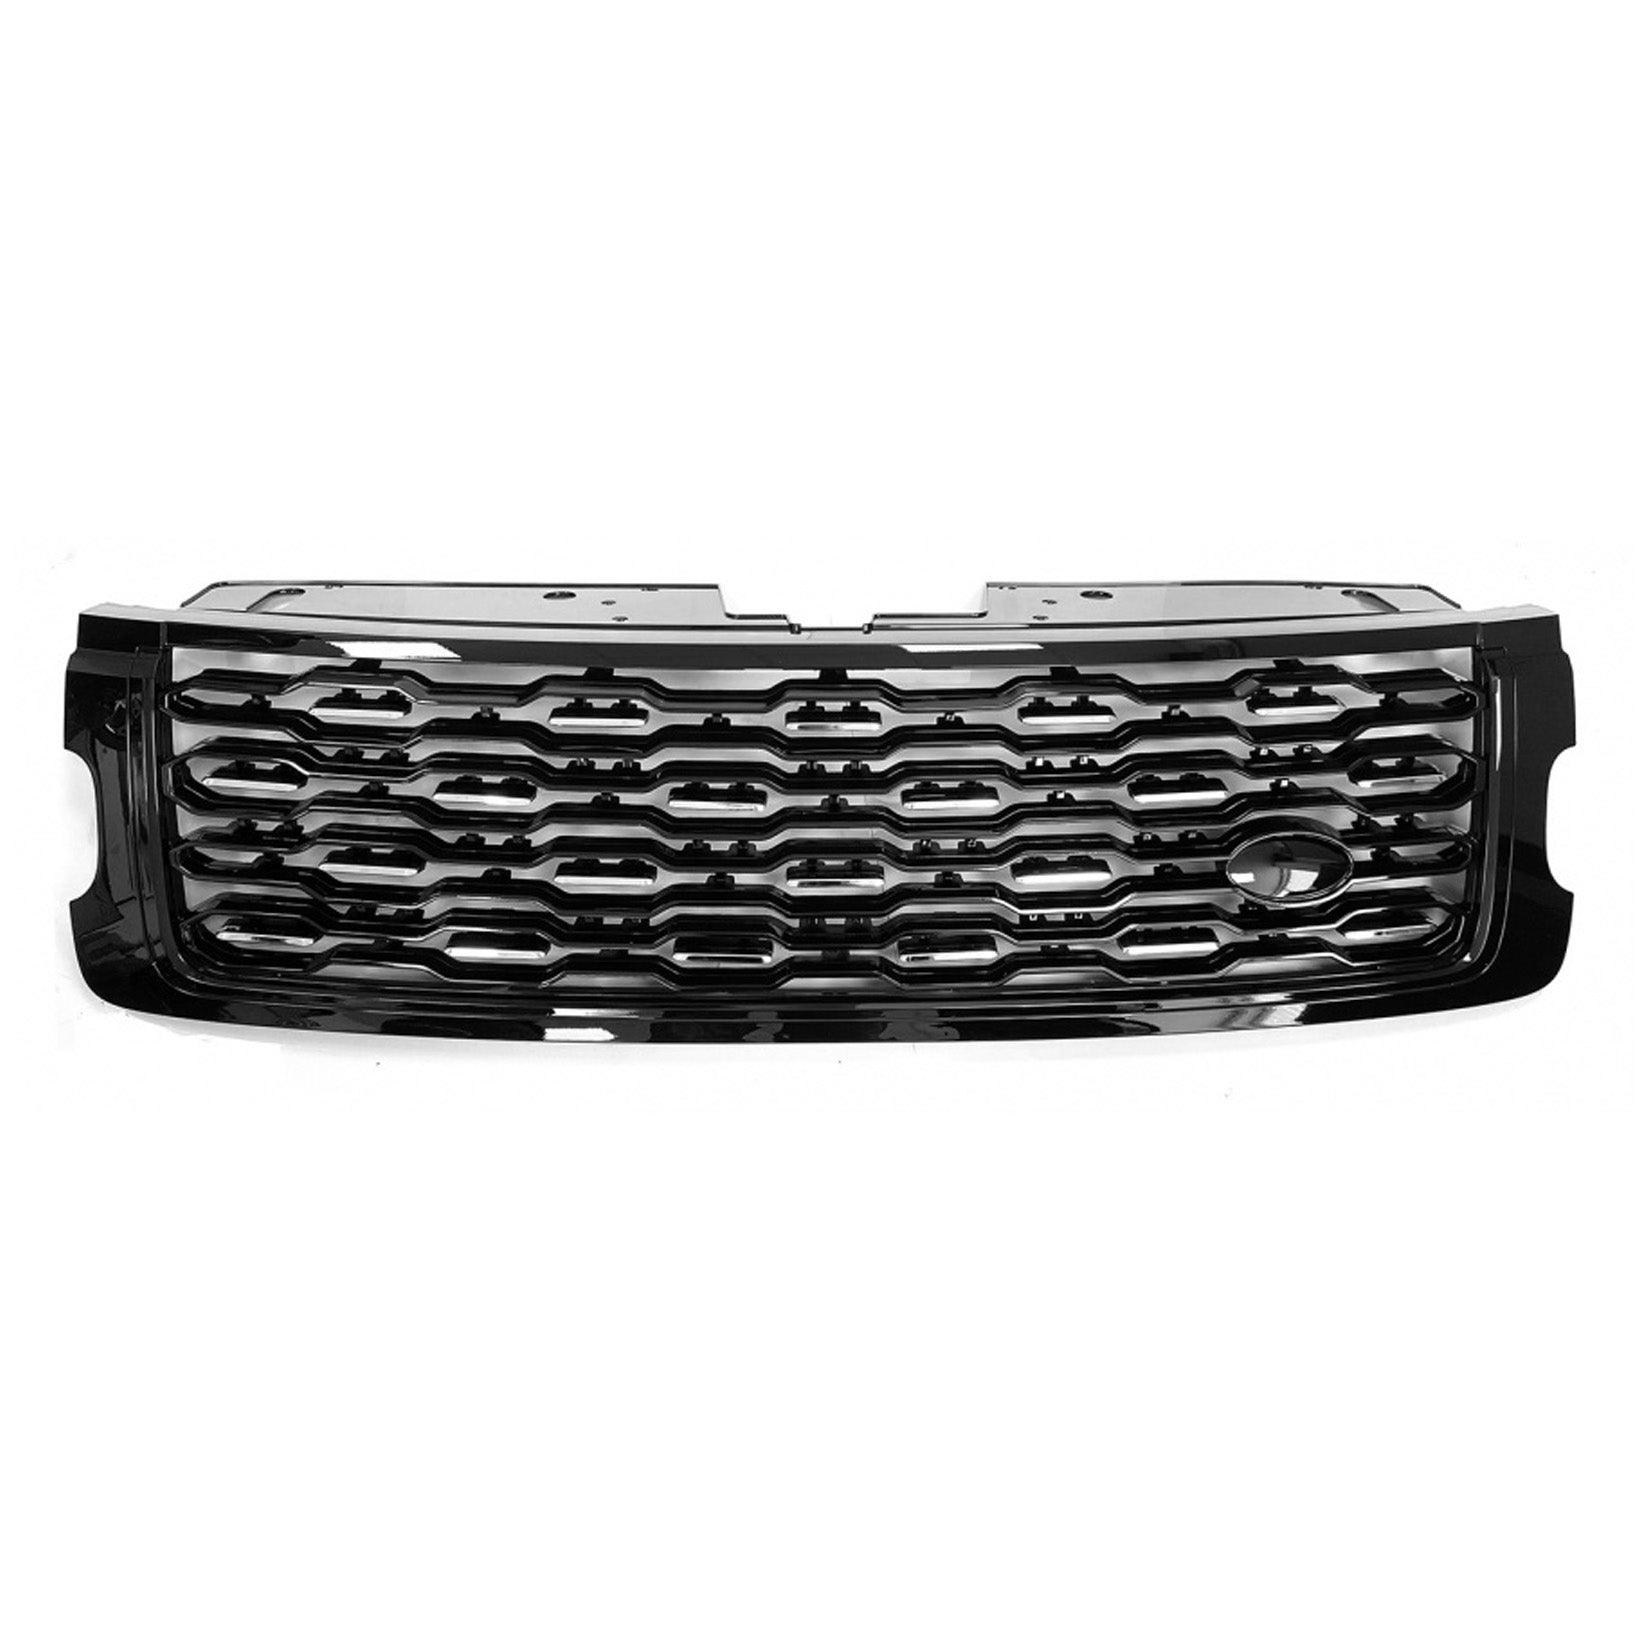 RANGE ROVER VOGUE 2018 ON – SVA FRONT GRILLE UPGRADE – BLACK AND CHROME - RisperStyling